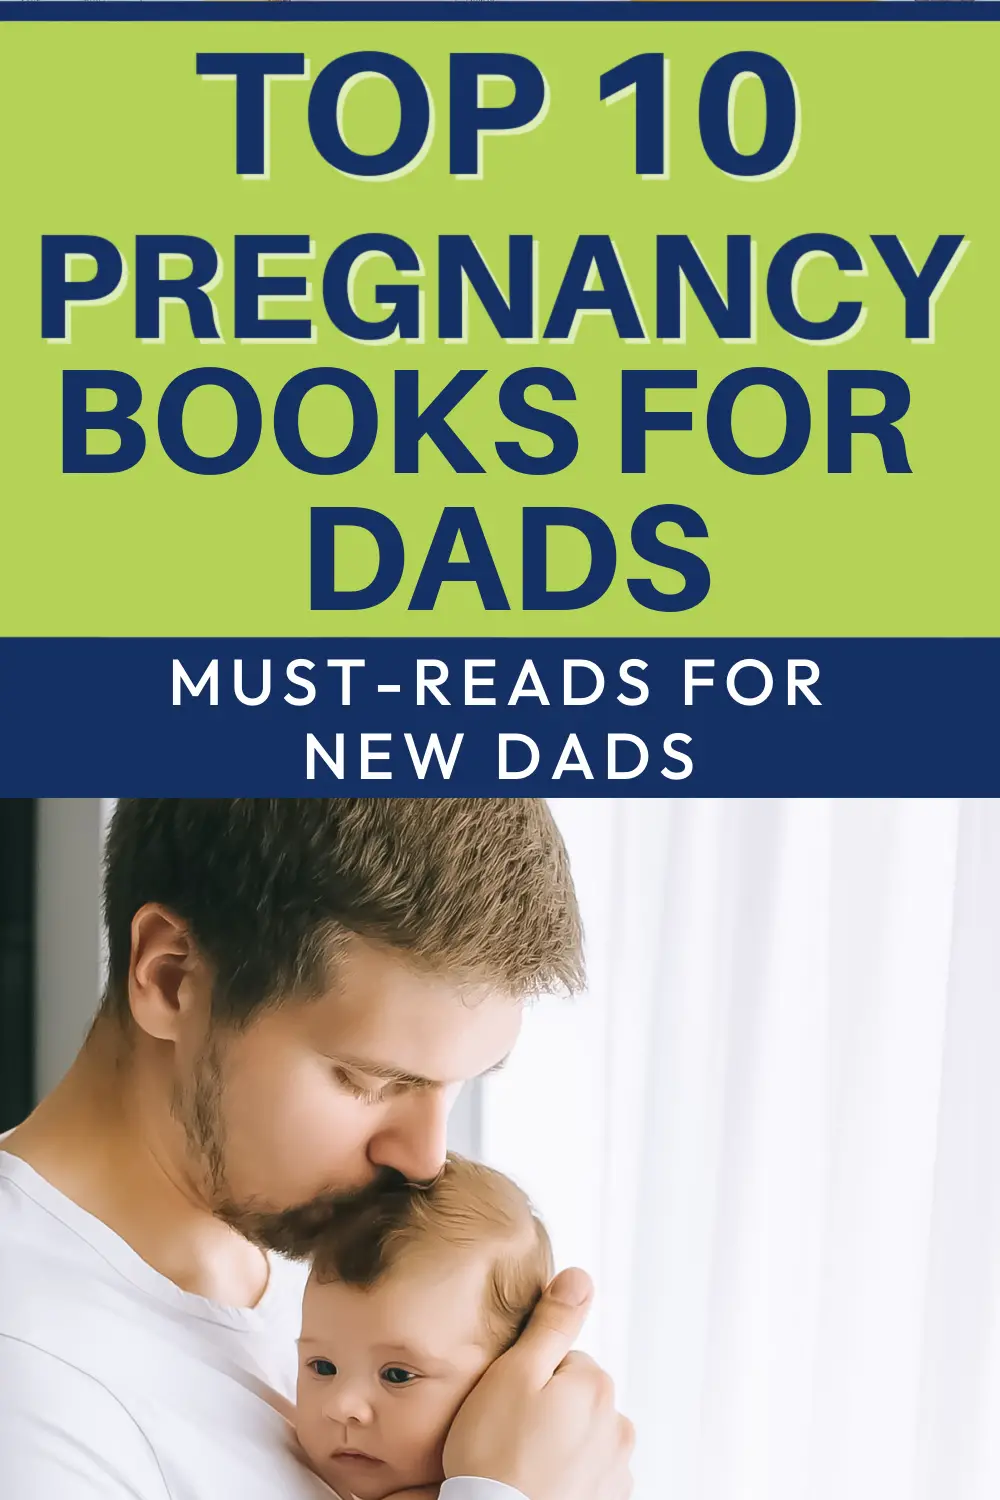 New father holding baby and kissing its head. Top 10 Pregnancy Books for Dads